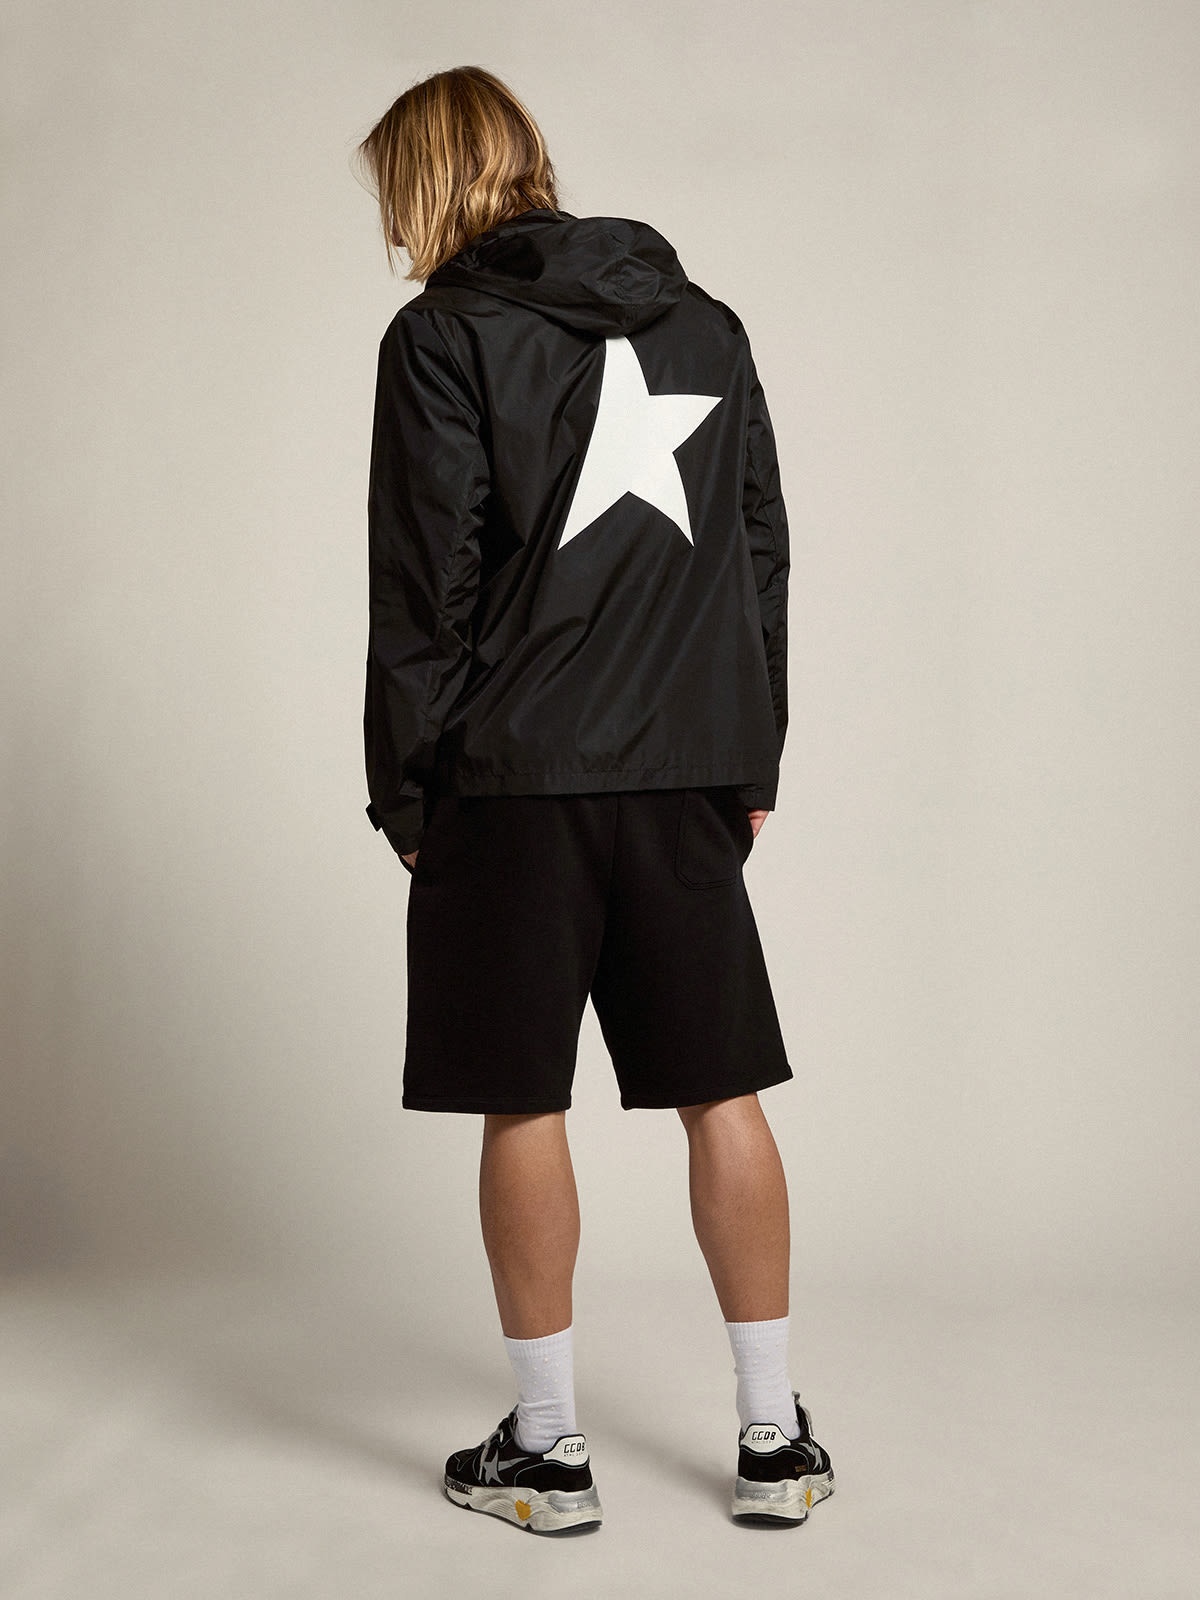 Men's windcheater with contrasting white logo and star - 3